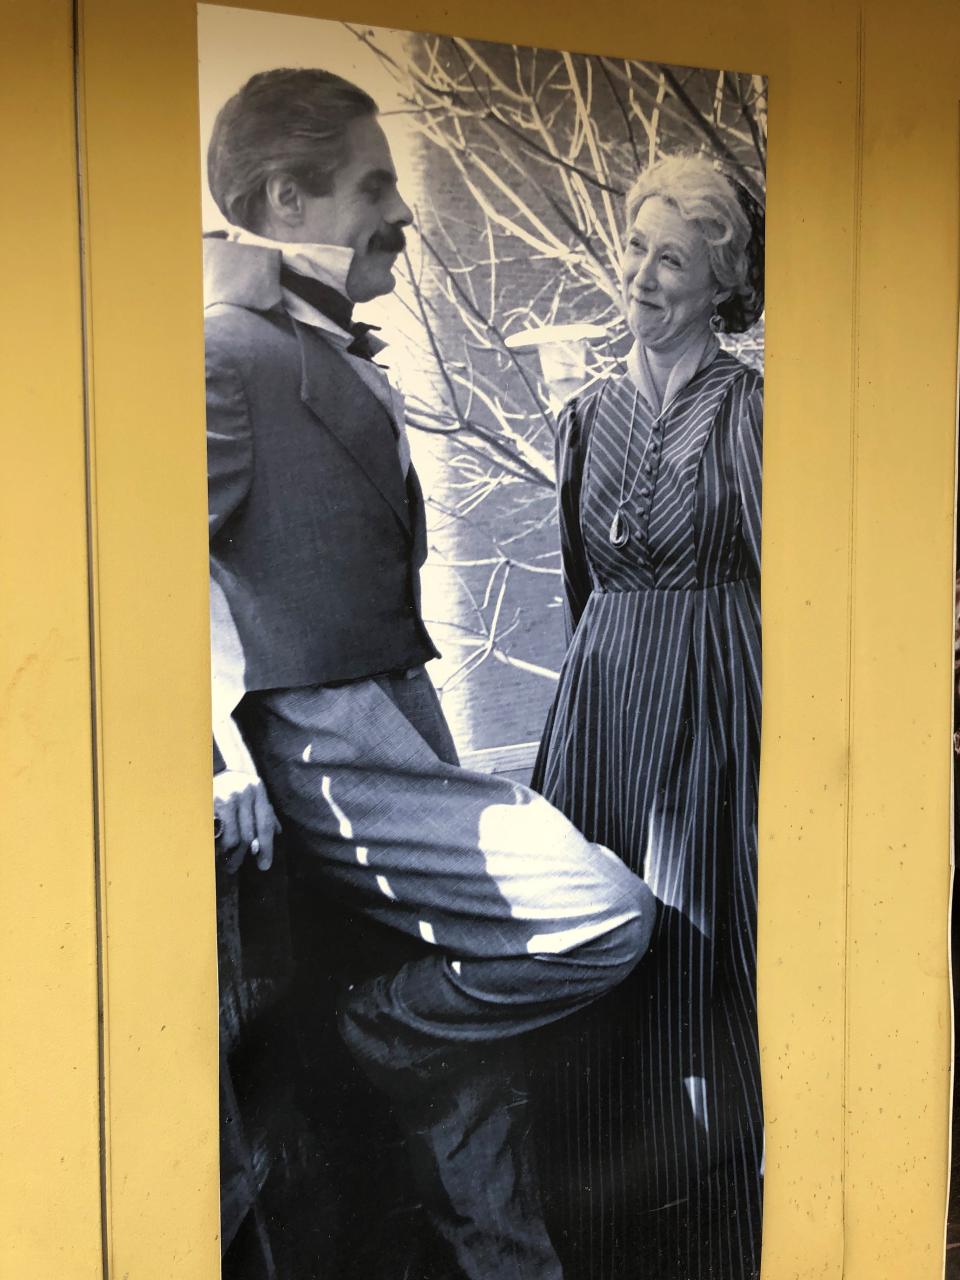 Current Clarence Brown Theatre managing director Tom Cervone is featured on a poster outside the Carousel Theatre for his leading role with Trish Doherty in “The Winter’s Tale” in 1990.